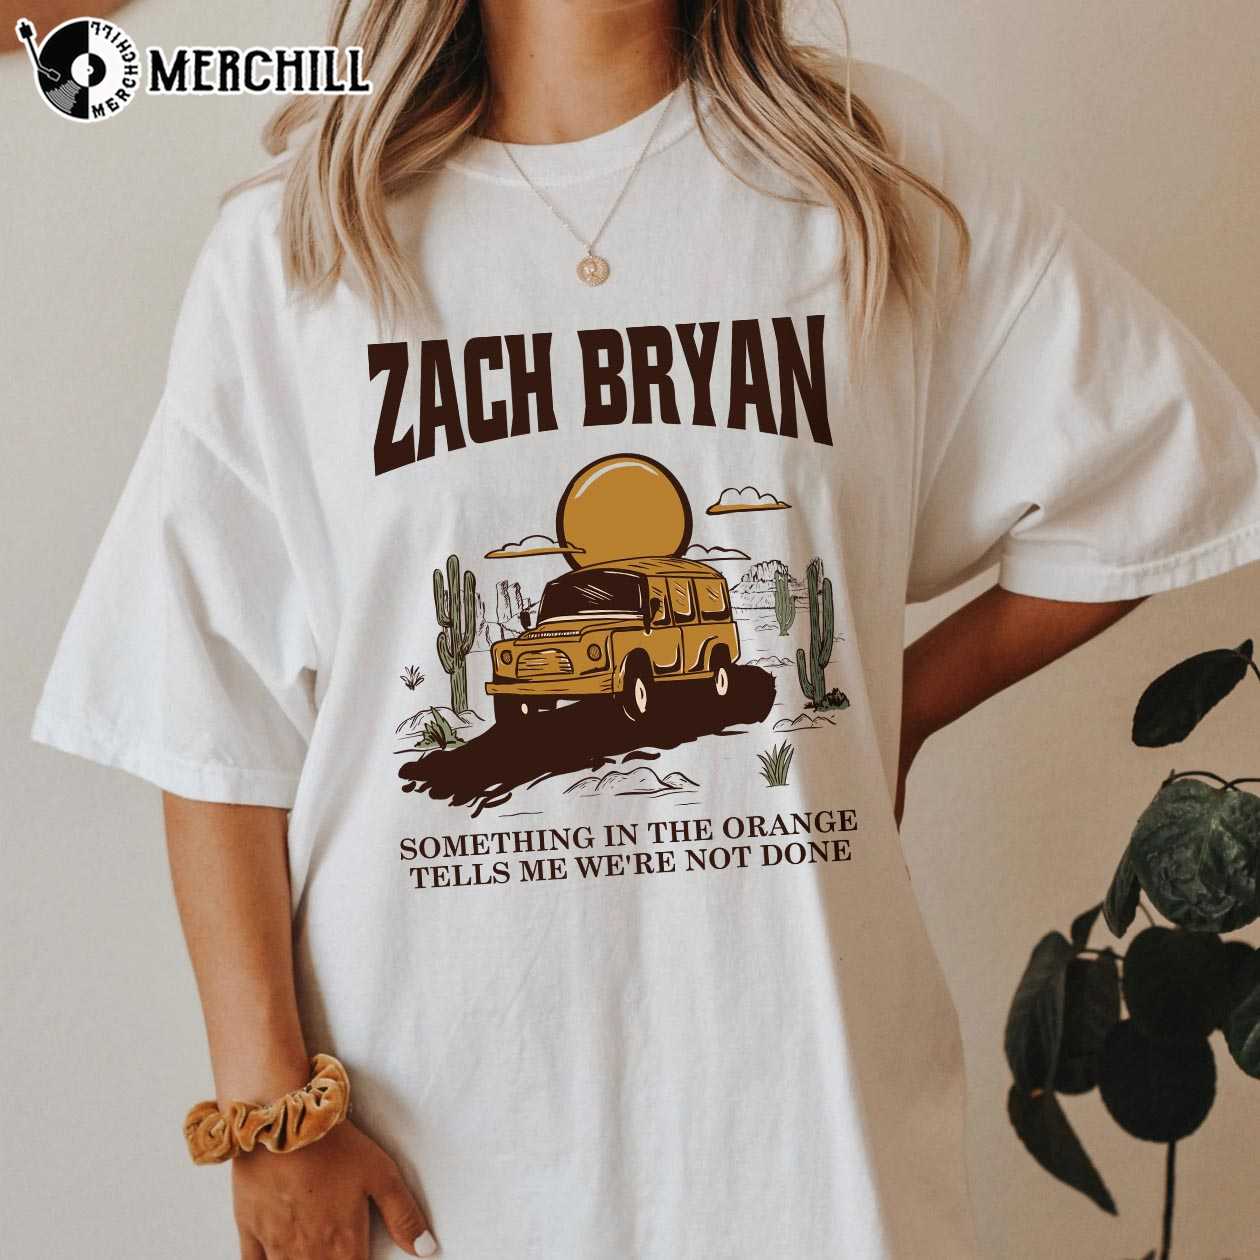 Country Spectacle: The Official Zach Bryan Merchandise Extravaganza